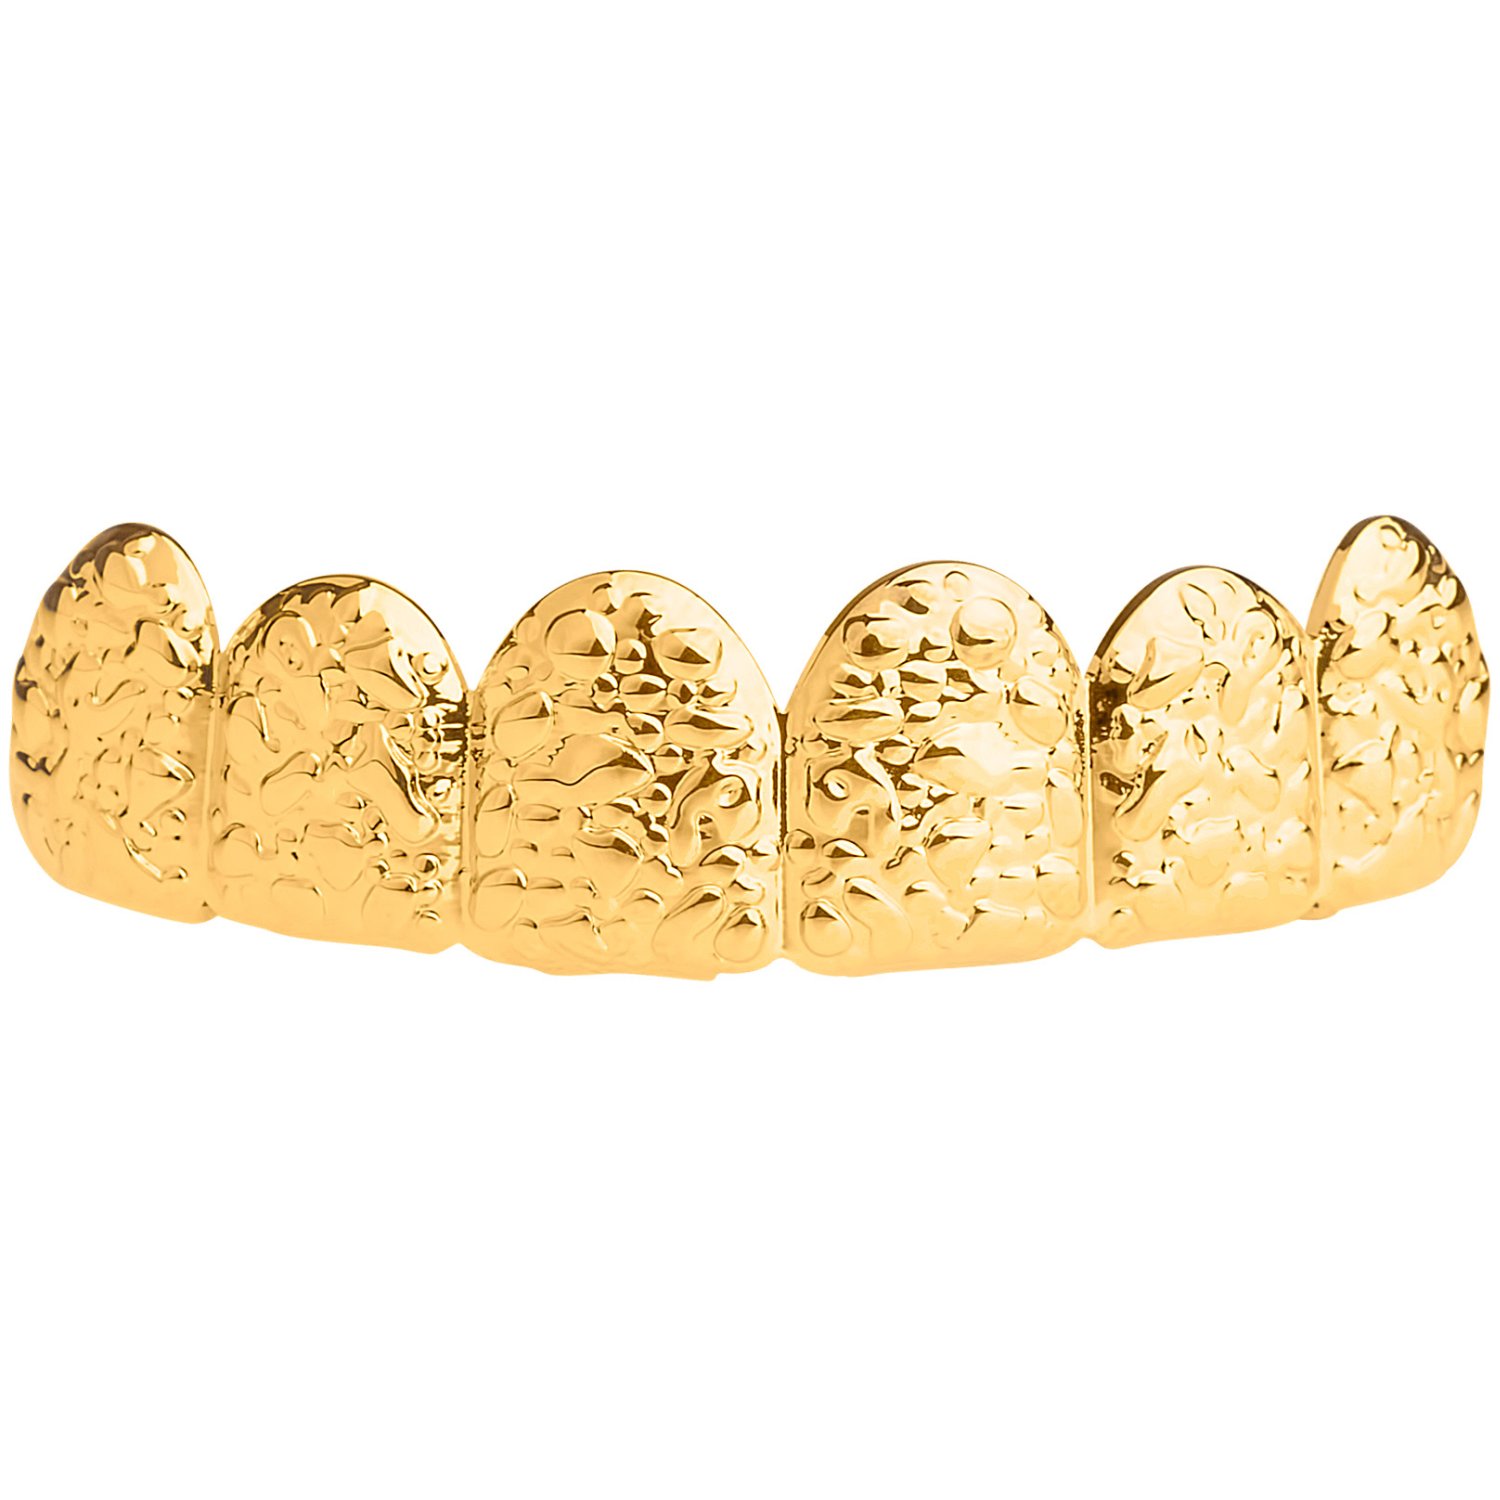 Top * one size fits all * Grillz-plata 